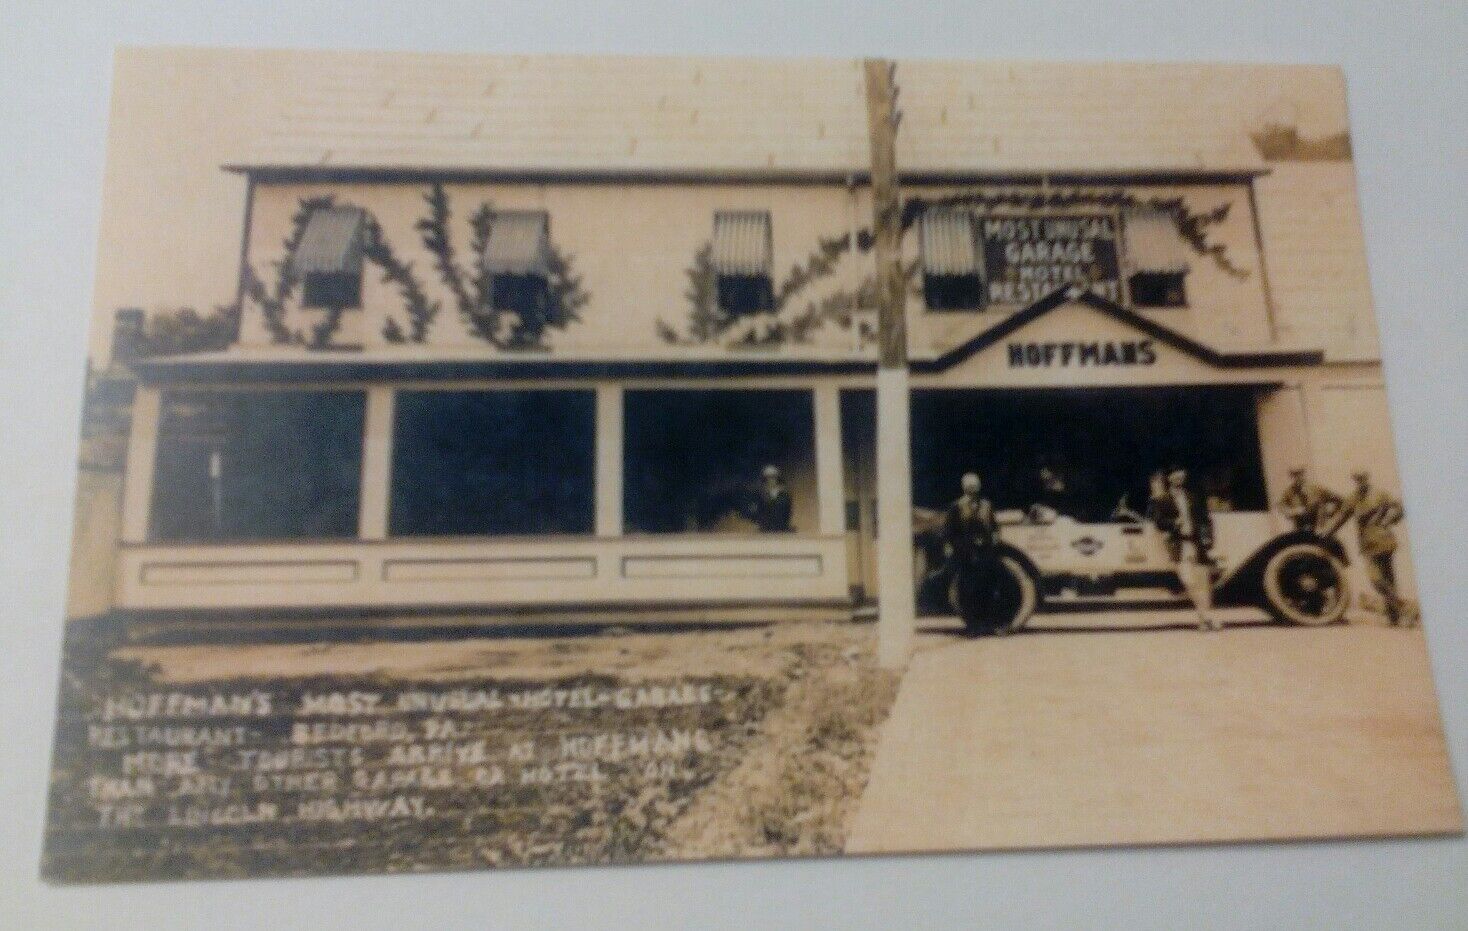 Old Hoffman\'s Garage Hotel Food Lincoln Highway Rt 30 Bedford PA. Postcard Repo